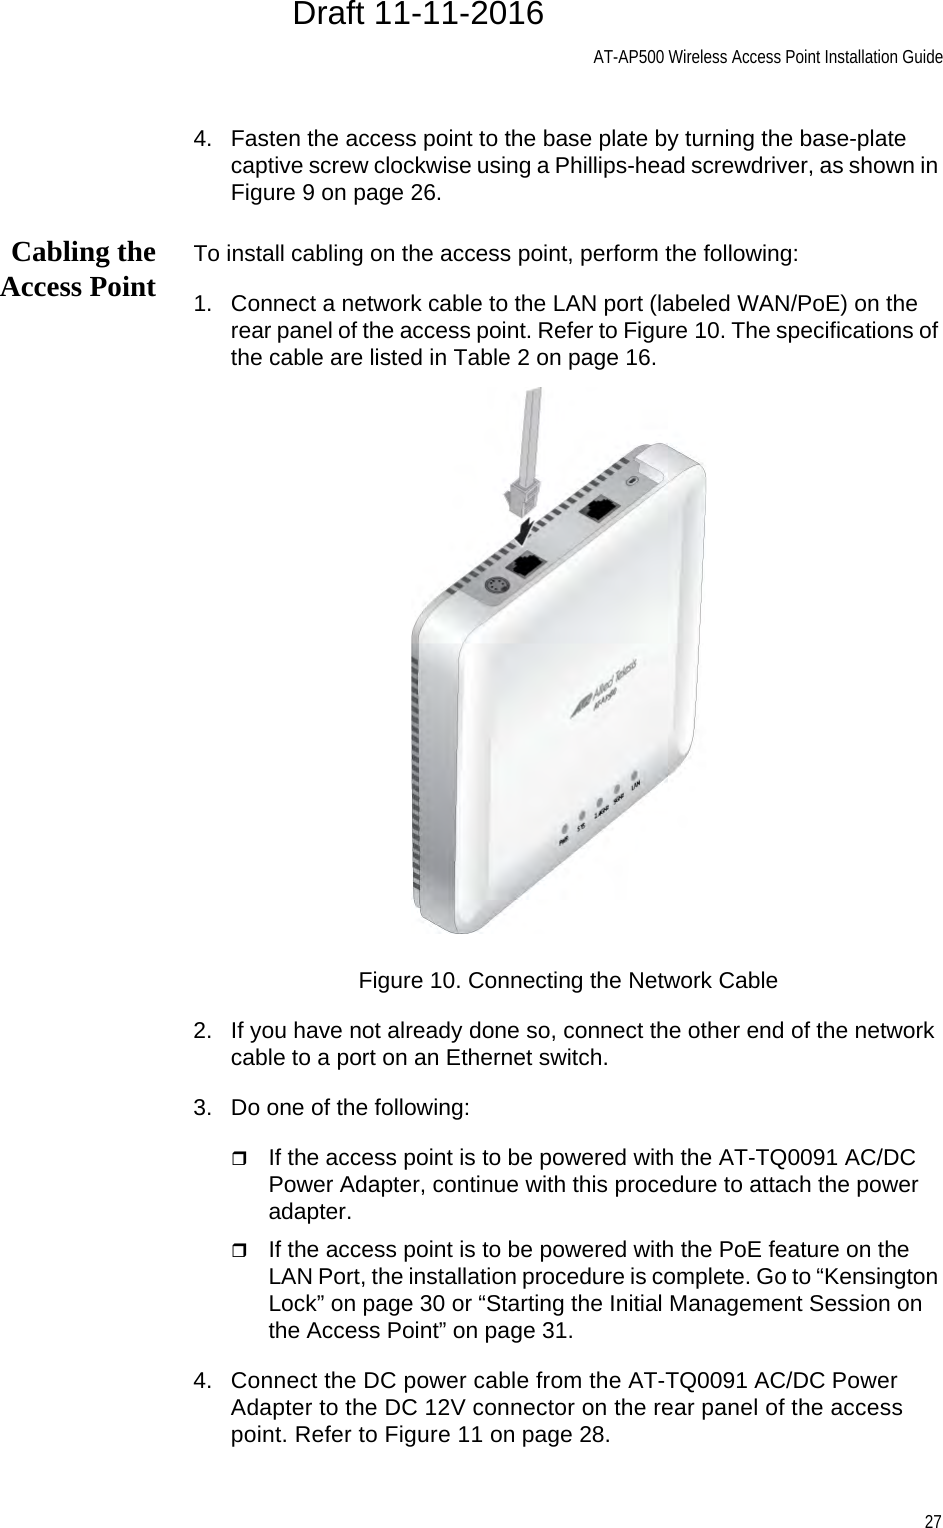 AT-AP500 Wireless Access Point Installation Guide274. Fasten the access point to the base plate by turning the base-plate captive screw clockwise using a Phillips-head screwdriver, as shown in Figure 9 on page 26.Cabling theAccess Point To install cabling on the access point, perform the following:1. Connect a network cable to the LAN port (labeled WAN/PoE) on the rear panel of the access point. Refer to Figure 10. The specifications of the cable are listed in Table 2 on page 16.Figure 10. Connecting the Network Cable2. If you have not already done so, connect the other end of the network cable to a port on an Ethernet switch.3. Do one of the following:If the access point is to be powered with the AT-TQ0091 AC/DC Power Adapter, continue with this procedure to attach the power adapter.If the access point is to be powered with the PoE feature on the LAN Port, the installation procedure is complete. Go to “Kensington Lock” on page 30 or “Starting the Initial Management Session on the Access Point” on page 31.4. Connect the DC power cable from the AT-TQ0091 AC/DC Power Adapter to the DC 12V connector on the rear panel of the access point. Refer to Figure 11 on page 28.Draft 11-11-2016